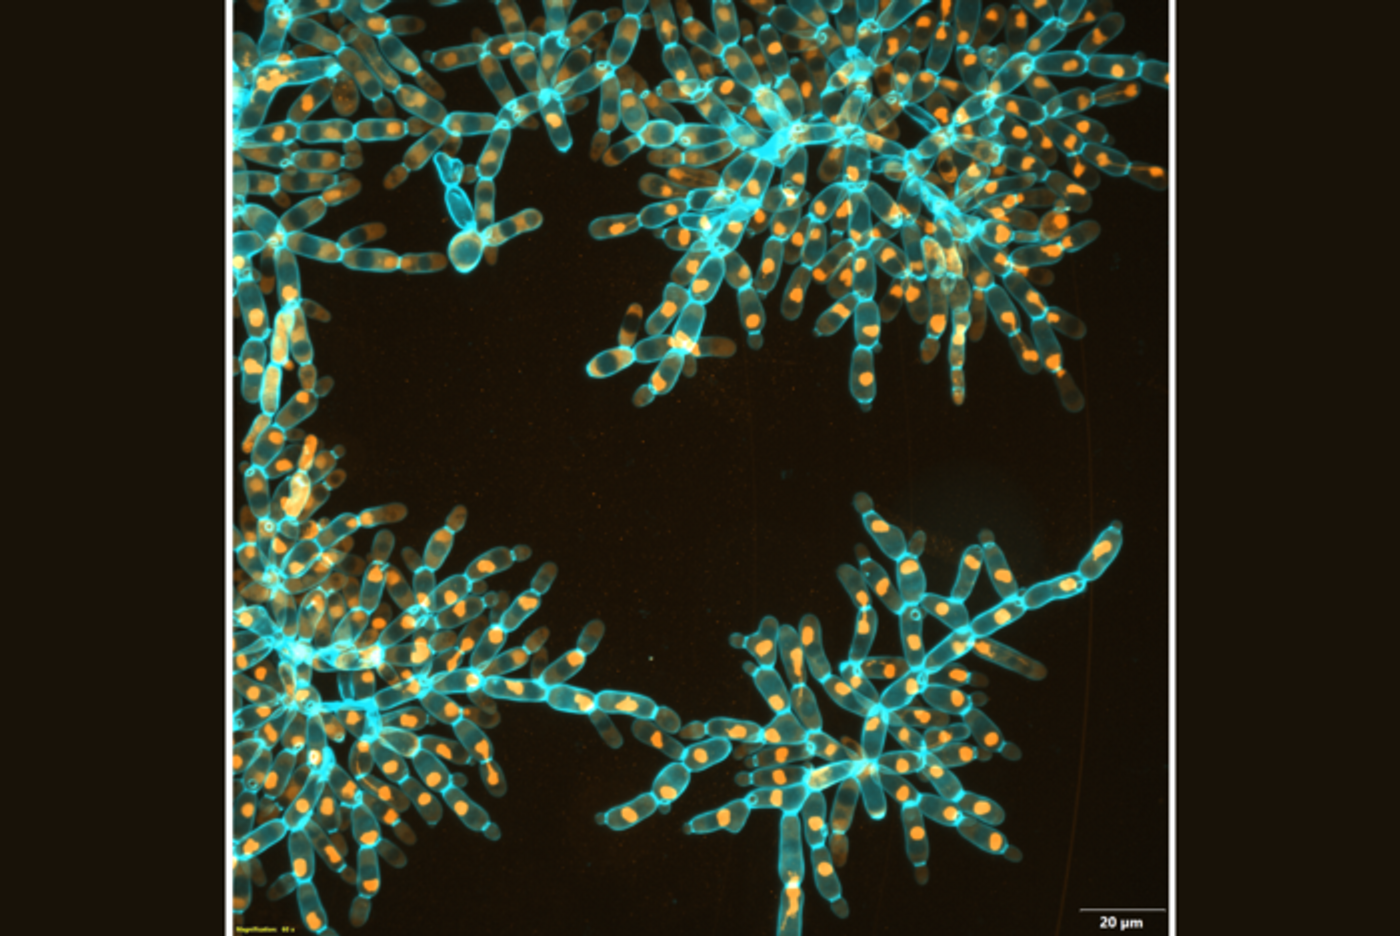 Macroscopic snowflake yeast with elongated cells fracture into modules, retaining the same underlying branched growth form of their microscopic ancestor. / Credit: Georgia Institute of Technology